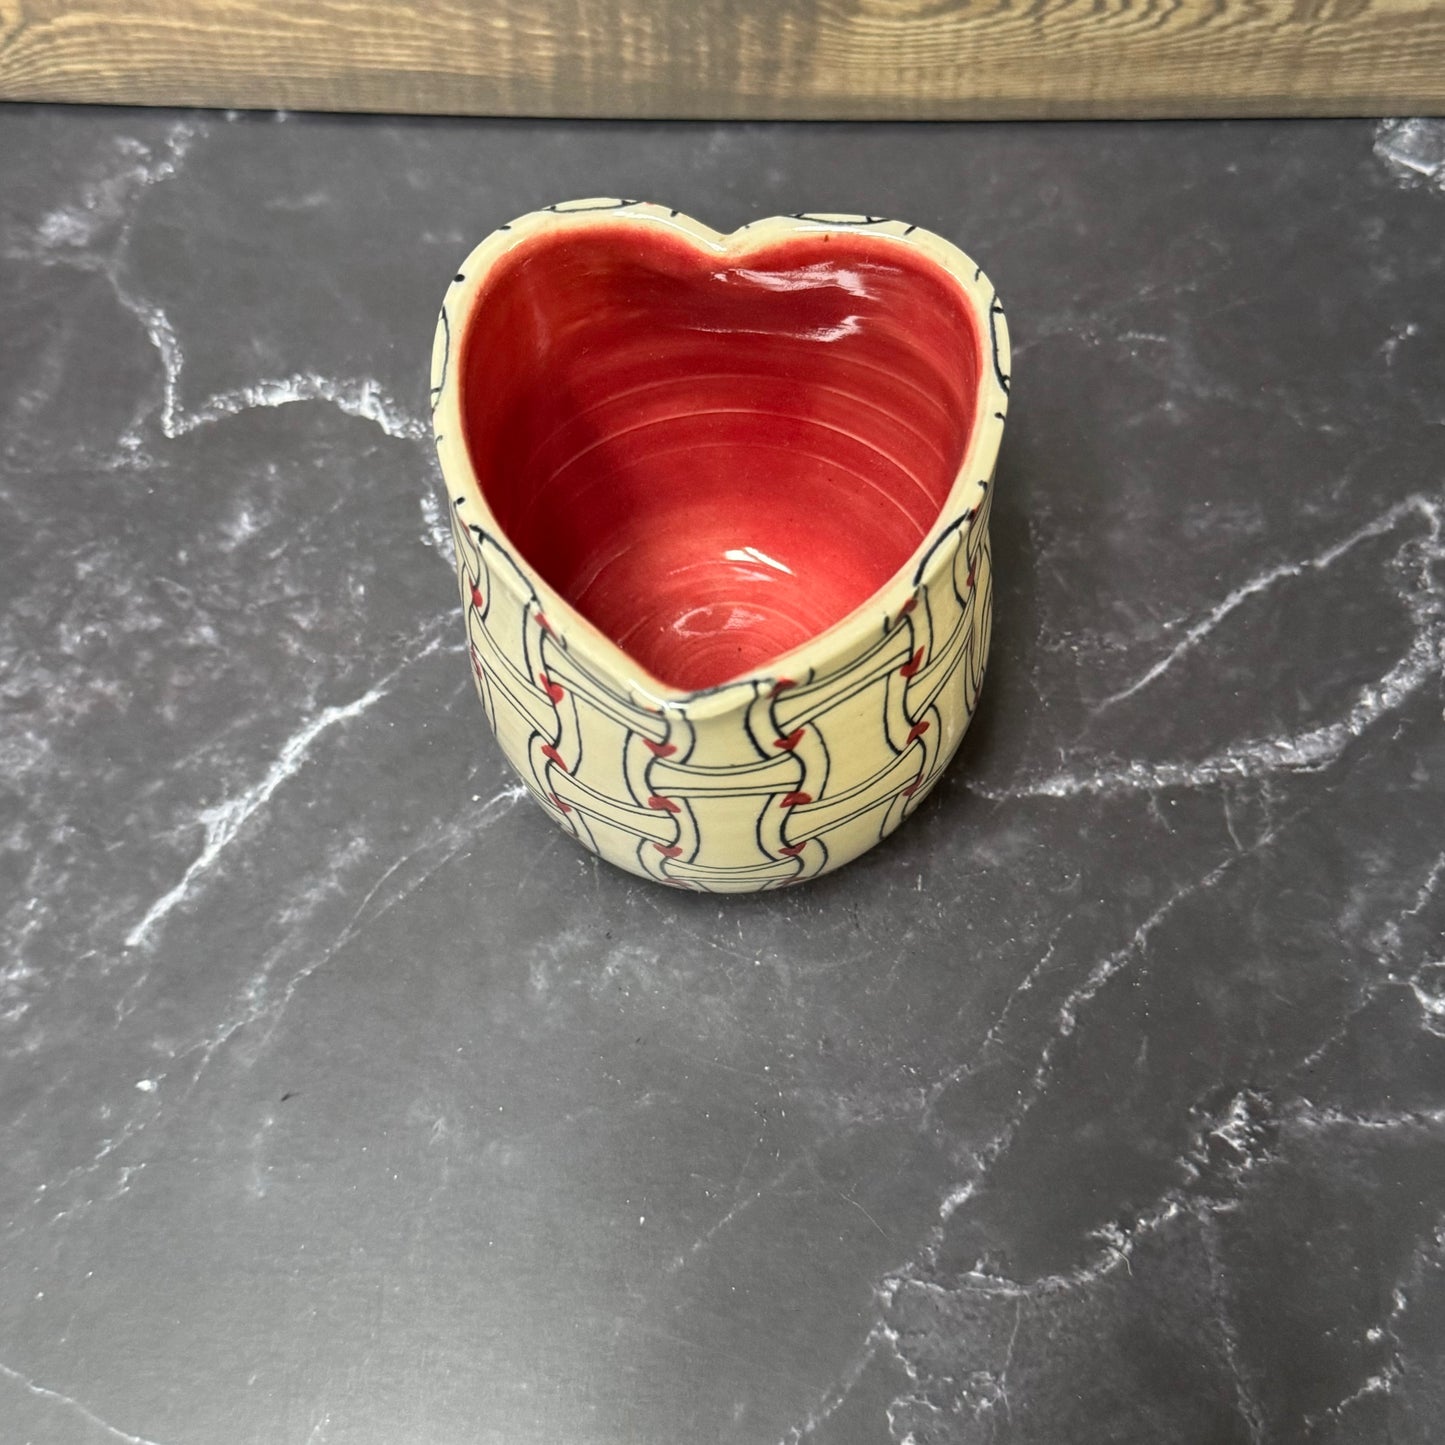 SECOND Heart Cup 1